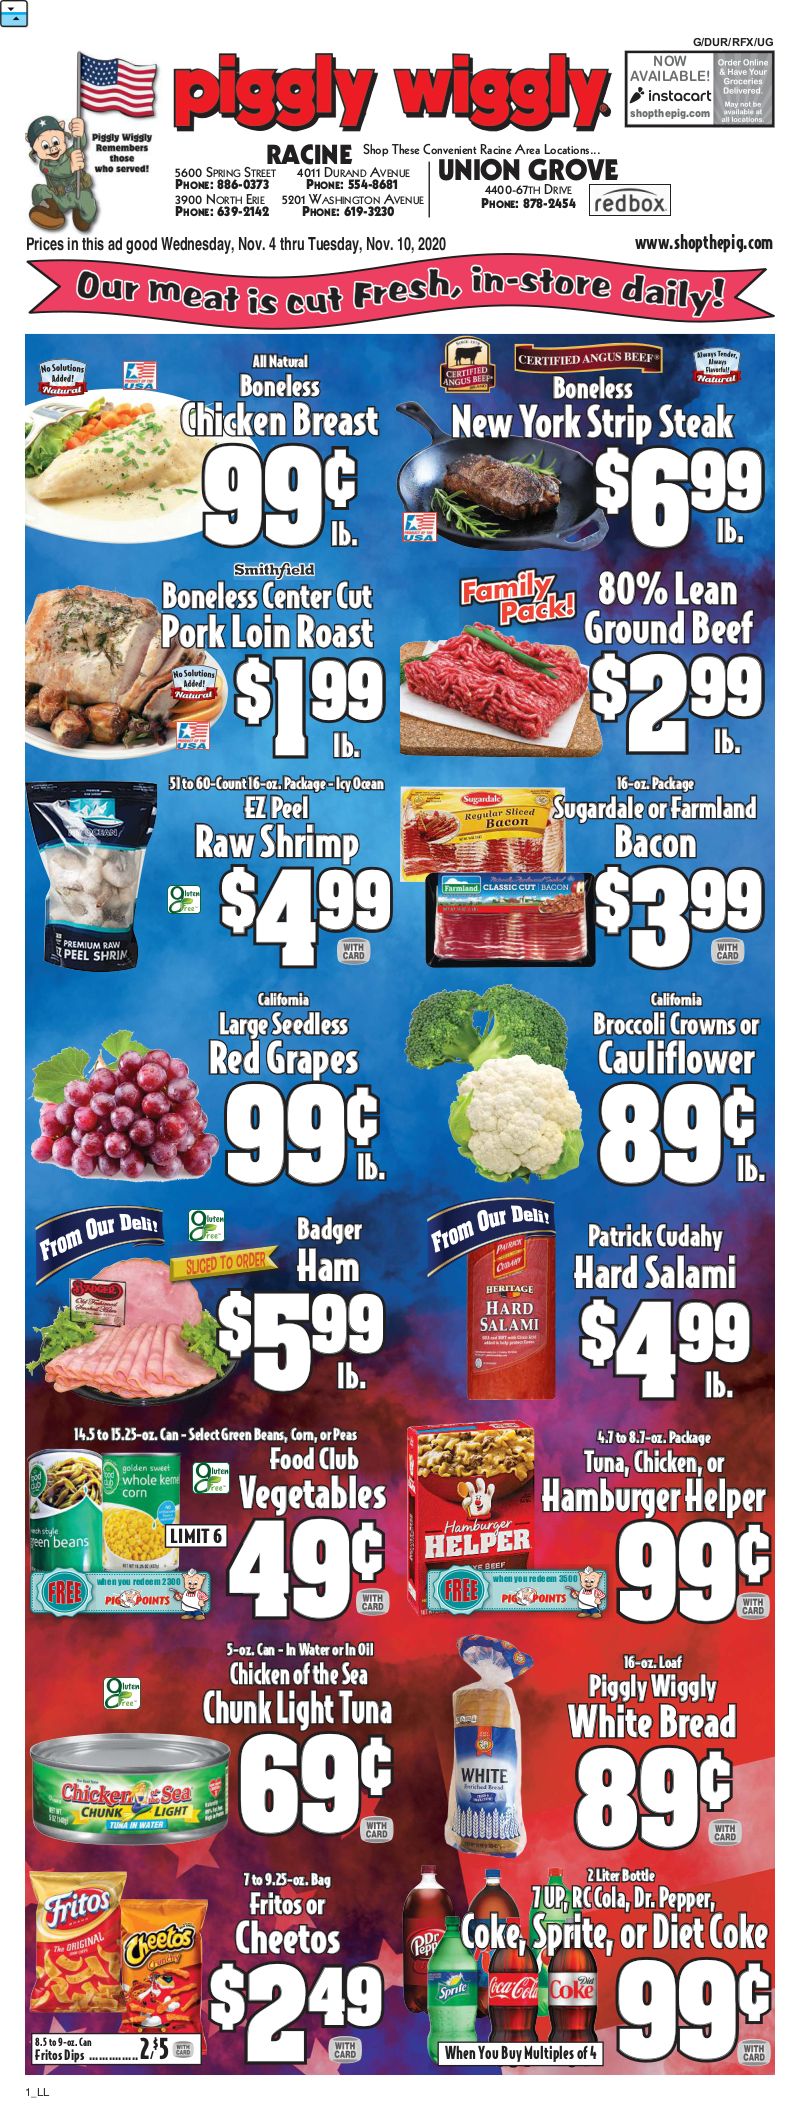 piggly wiggly etowah tn weekly ad